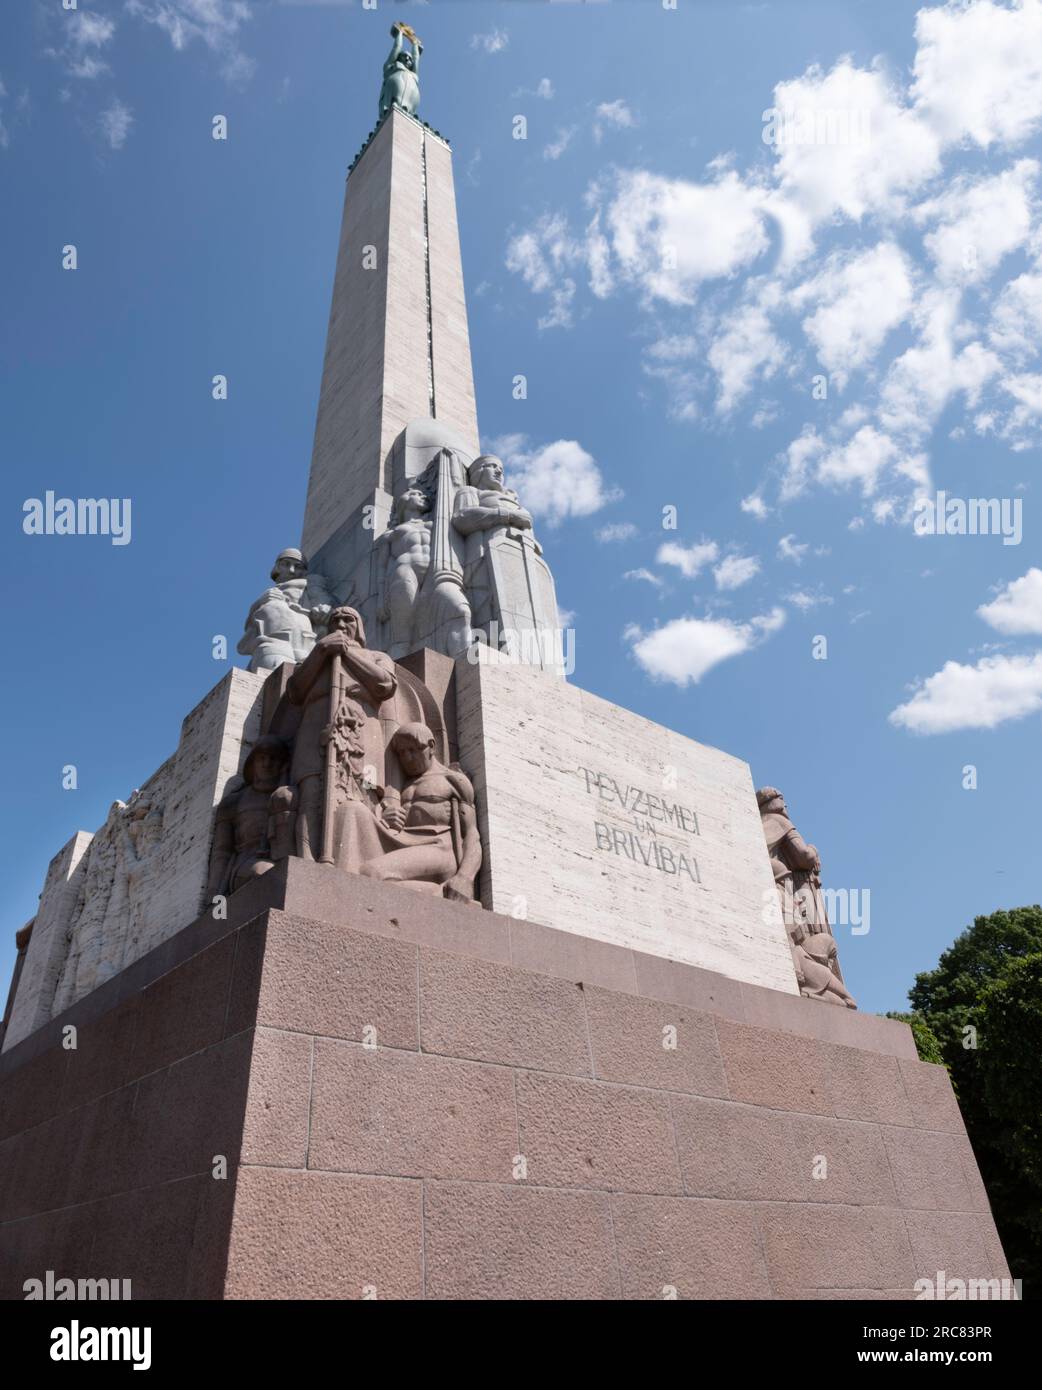 Freedom Monument in Riga, Latvia. The memorial honors soldiers who died during the Latvian War of Independence (1918-1920) Stock Photo